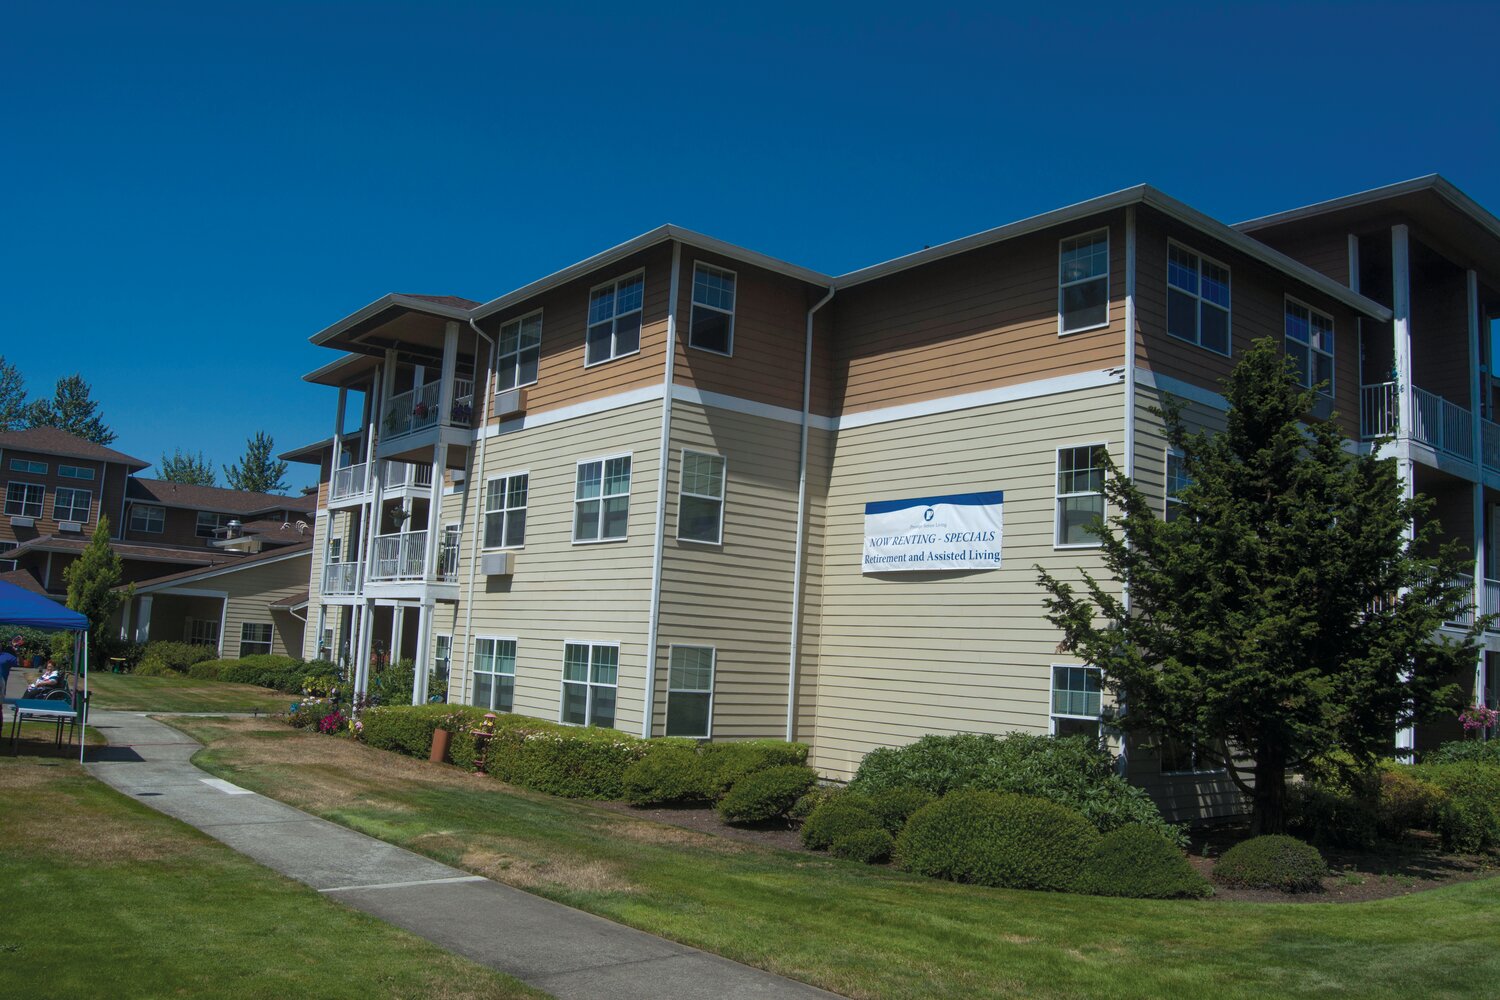 Prestige Senior Living Rosemont can be found on 215 Killion Road NW in Yelm.